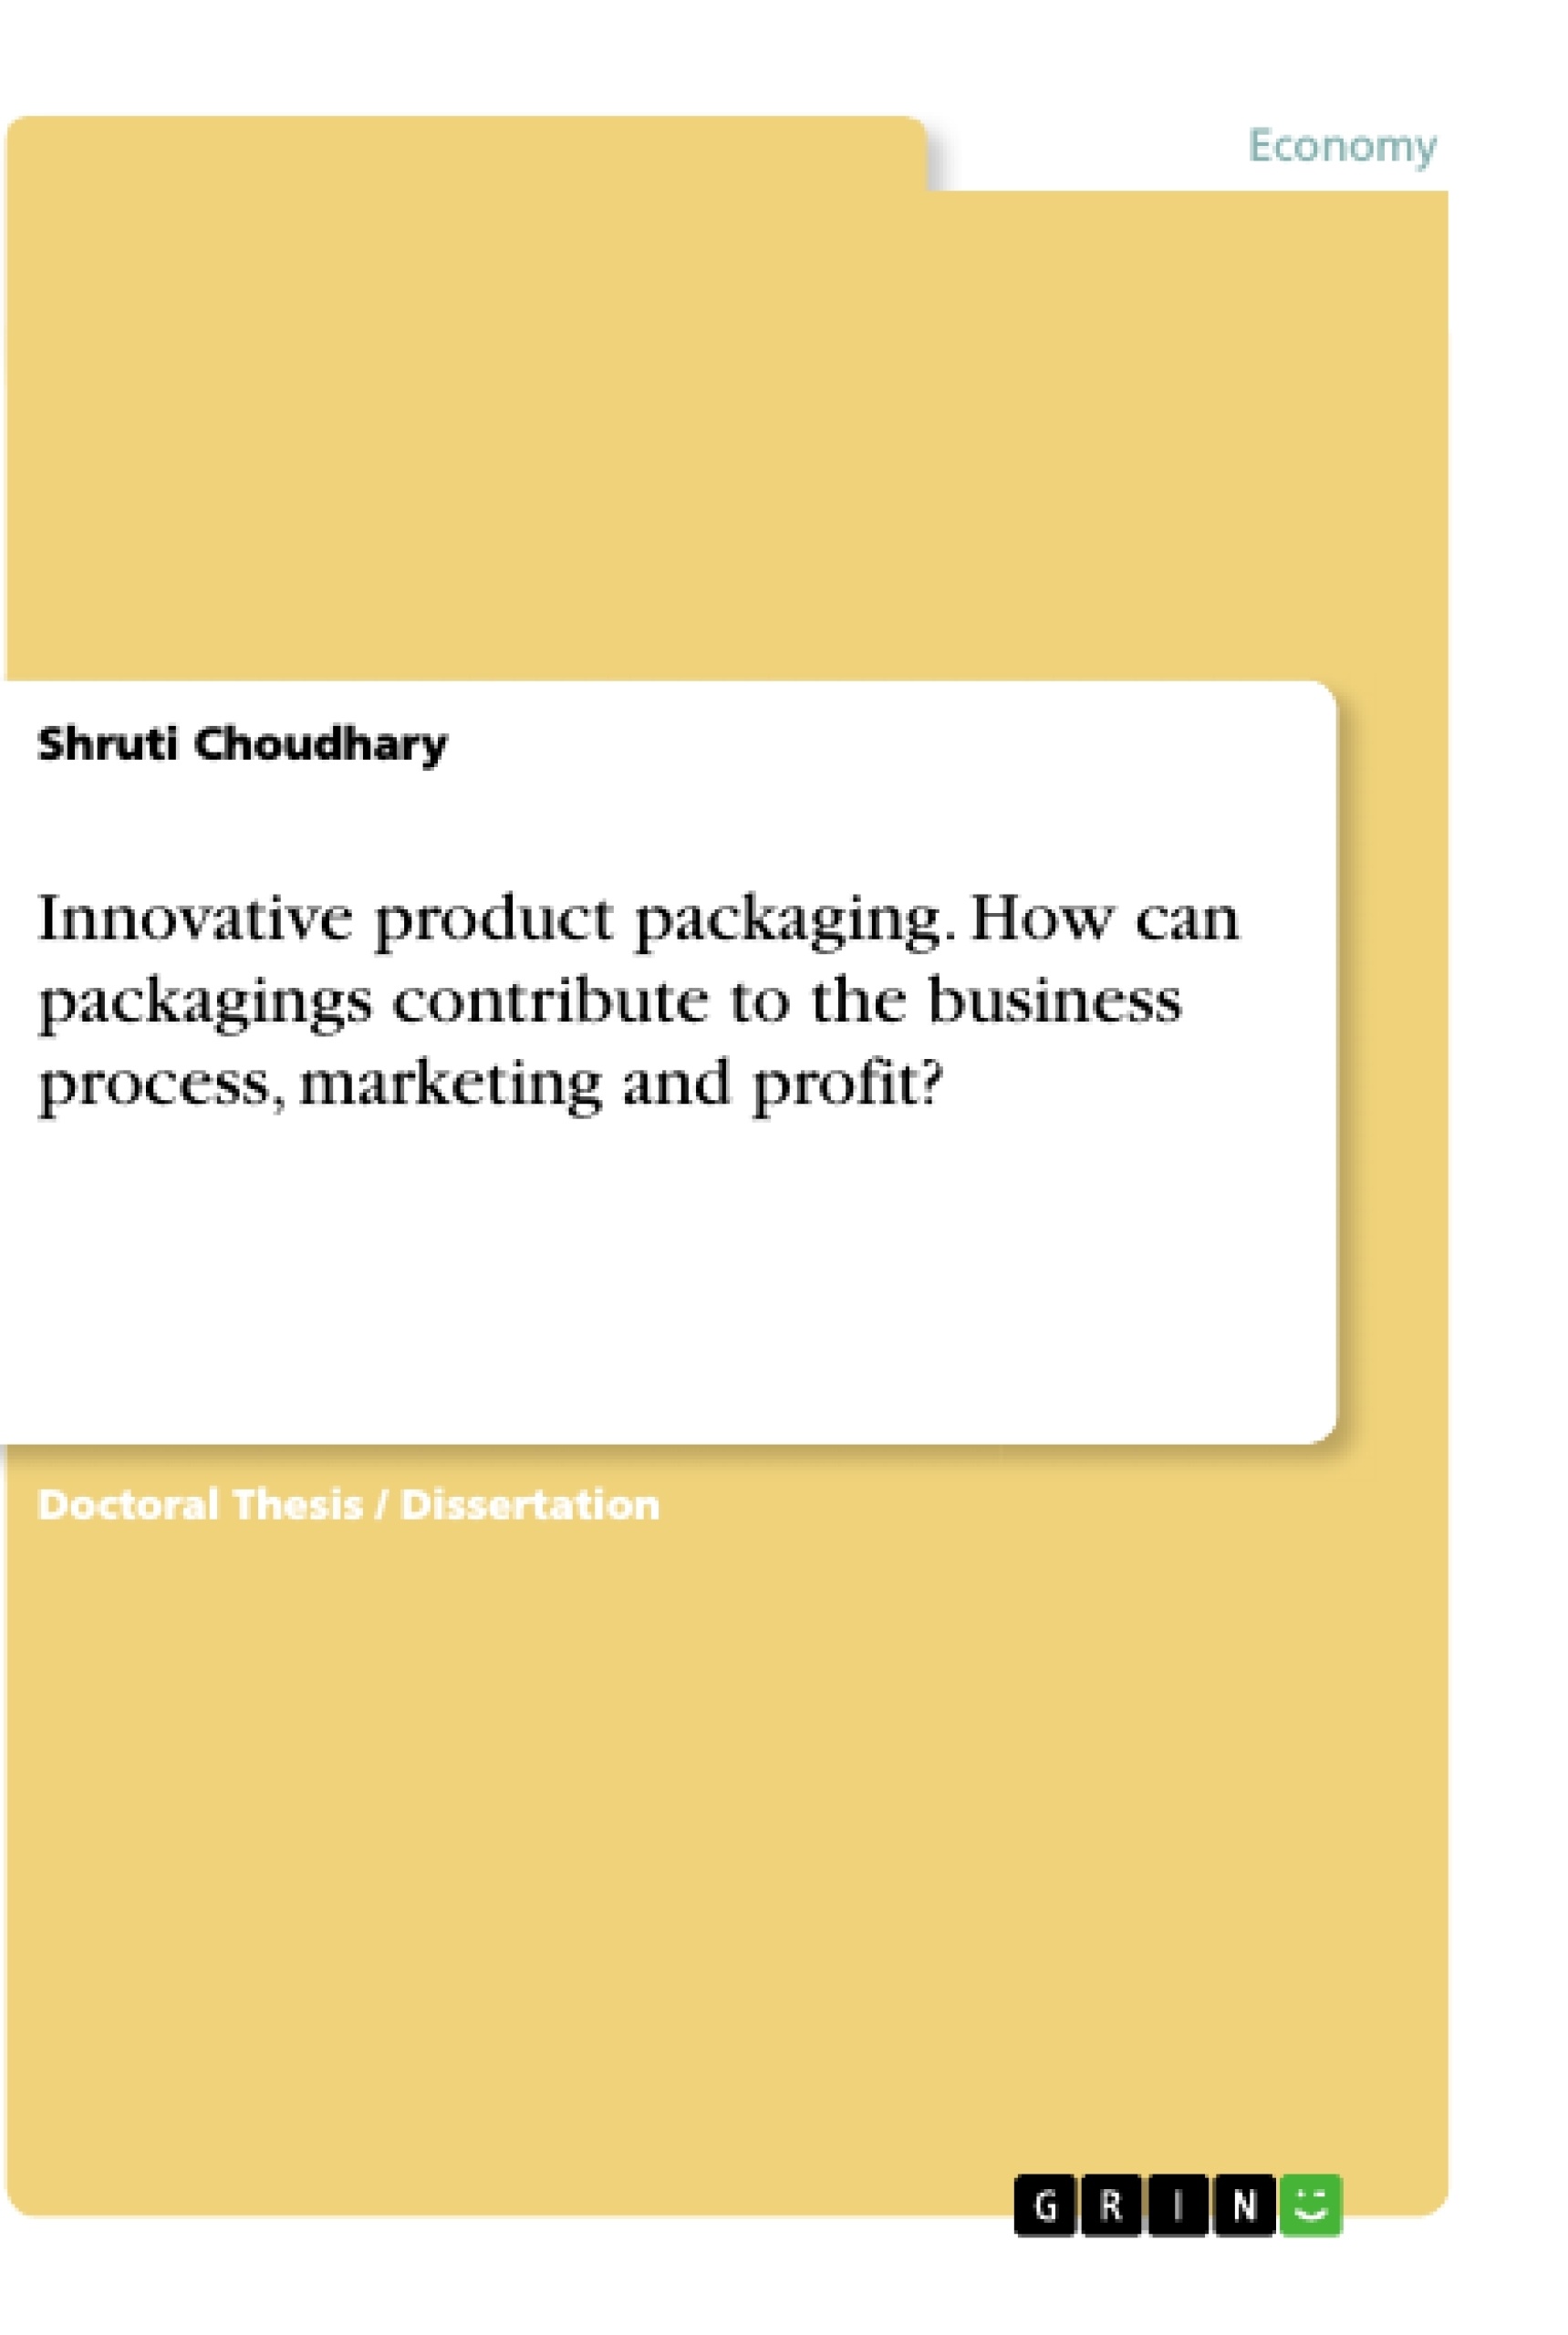 Título: Innovative product packaging. How can packagings contribute to the business process, marketing and profit?